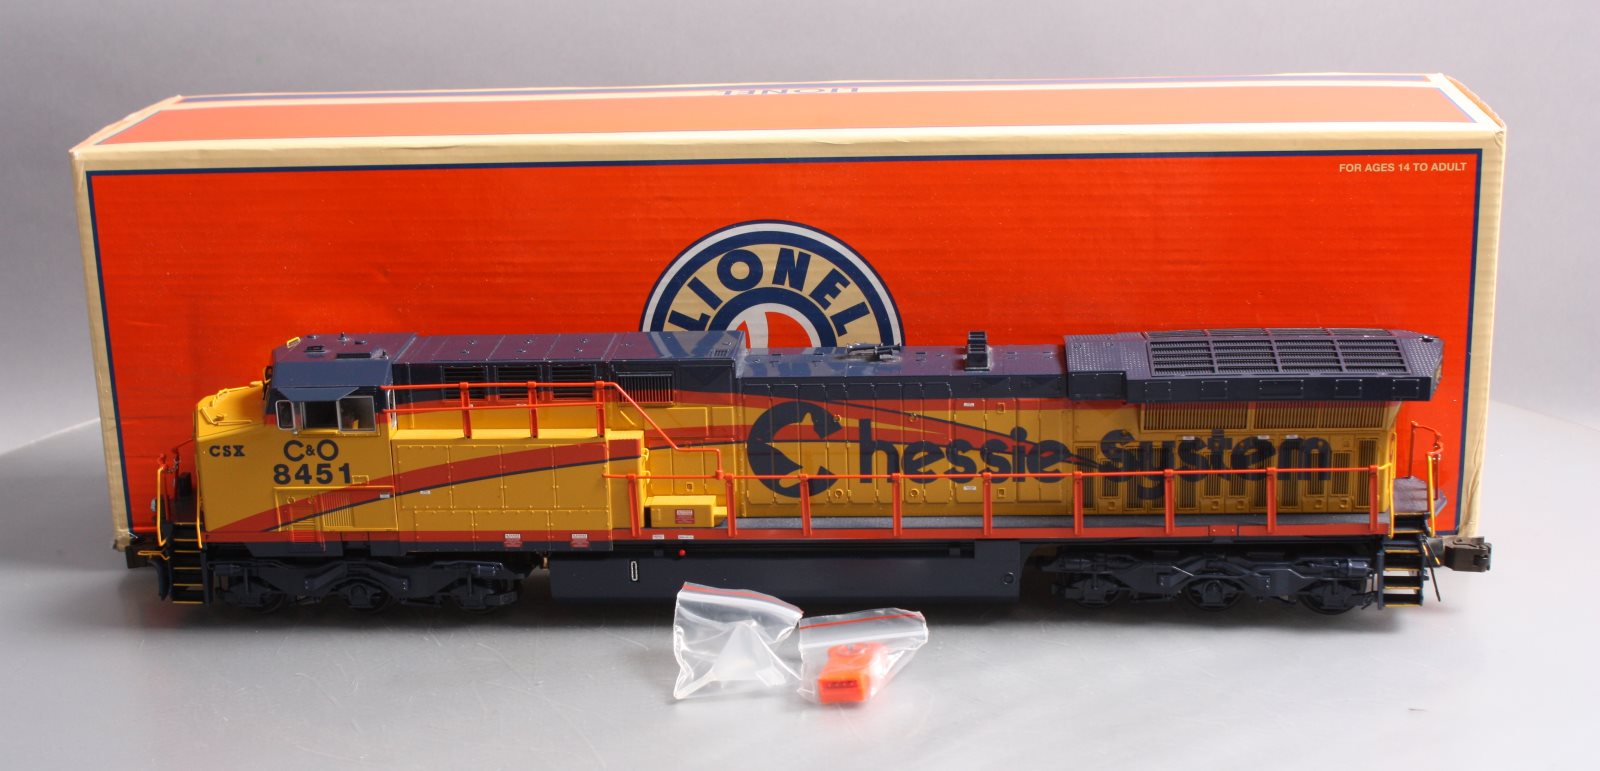 Sold at Auction: Two Lionel CSX/Chessie System AC6000 Diesel Locomotives  38405 & 38406